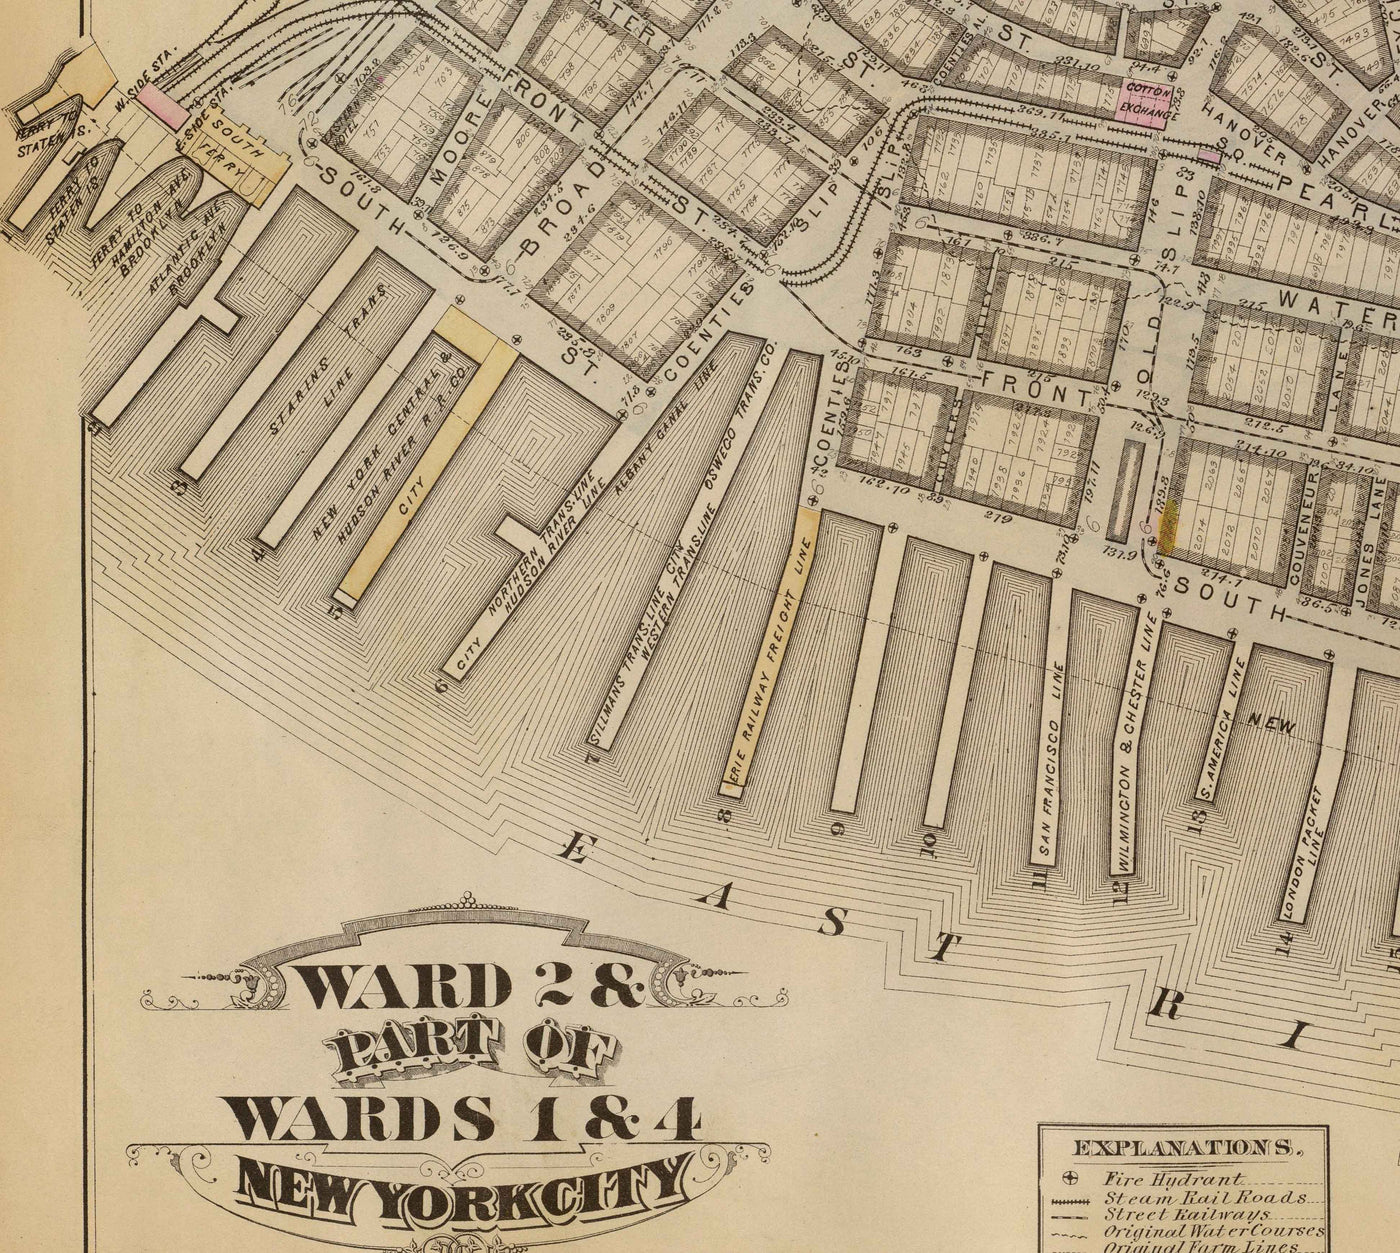 Old Map of Financial District & Civic Center, 1879 - Manhattan Wards, Wall St, Fulton St, East River, City Hall, Courthouse, Treasury